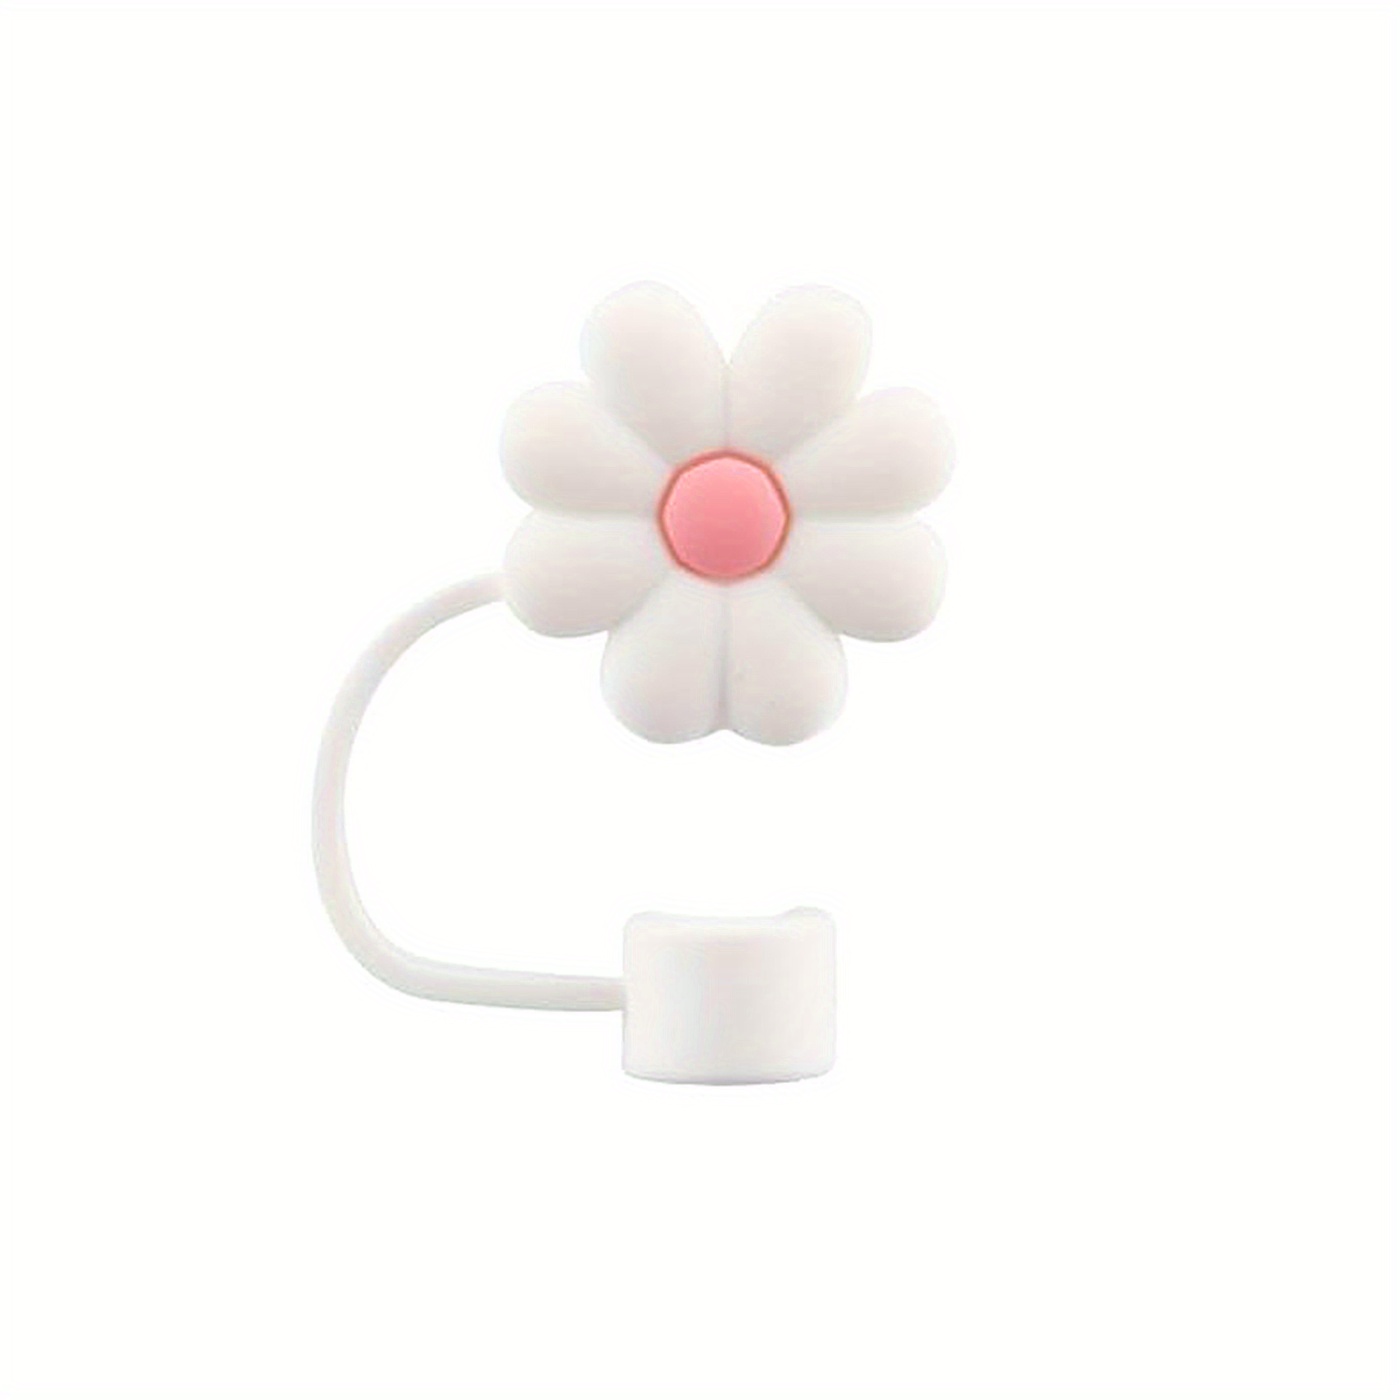 Cute Cartoon Love Flower Straw Cover, Reusable Dustproof Silicone